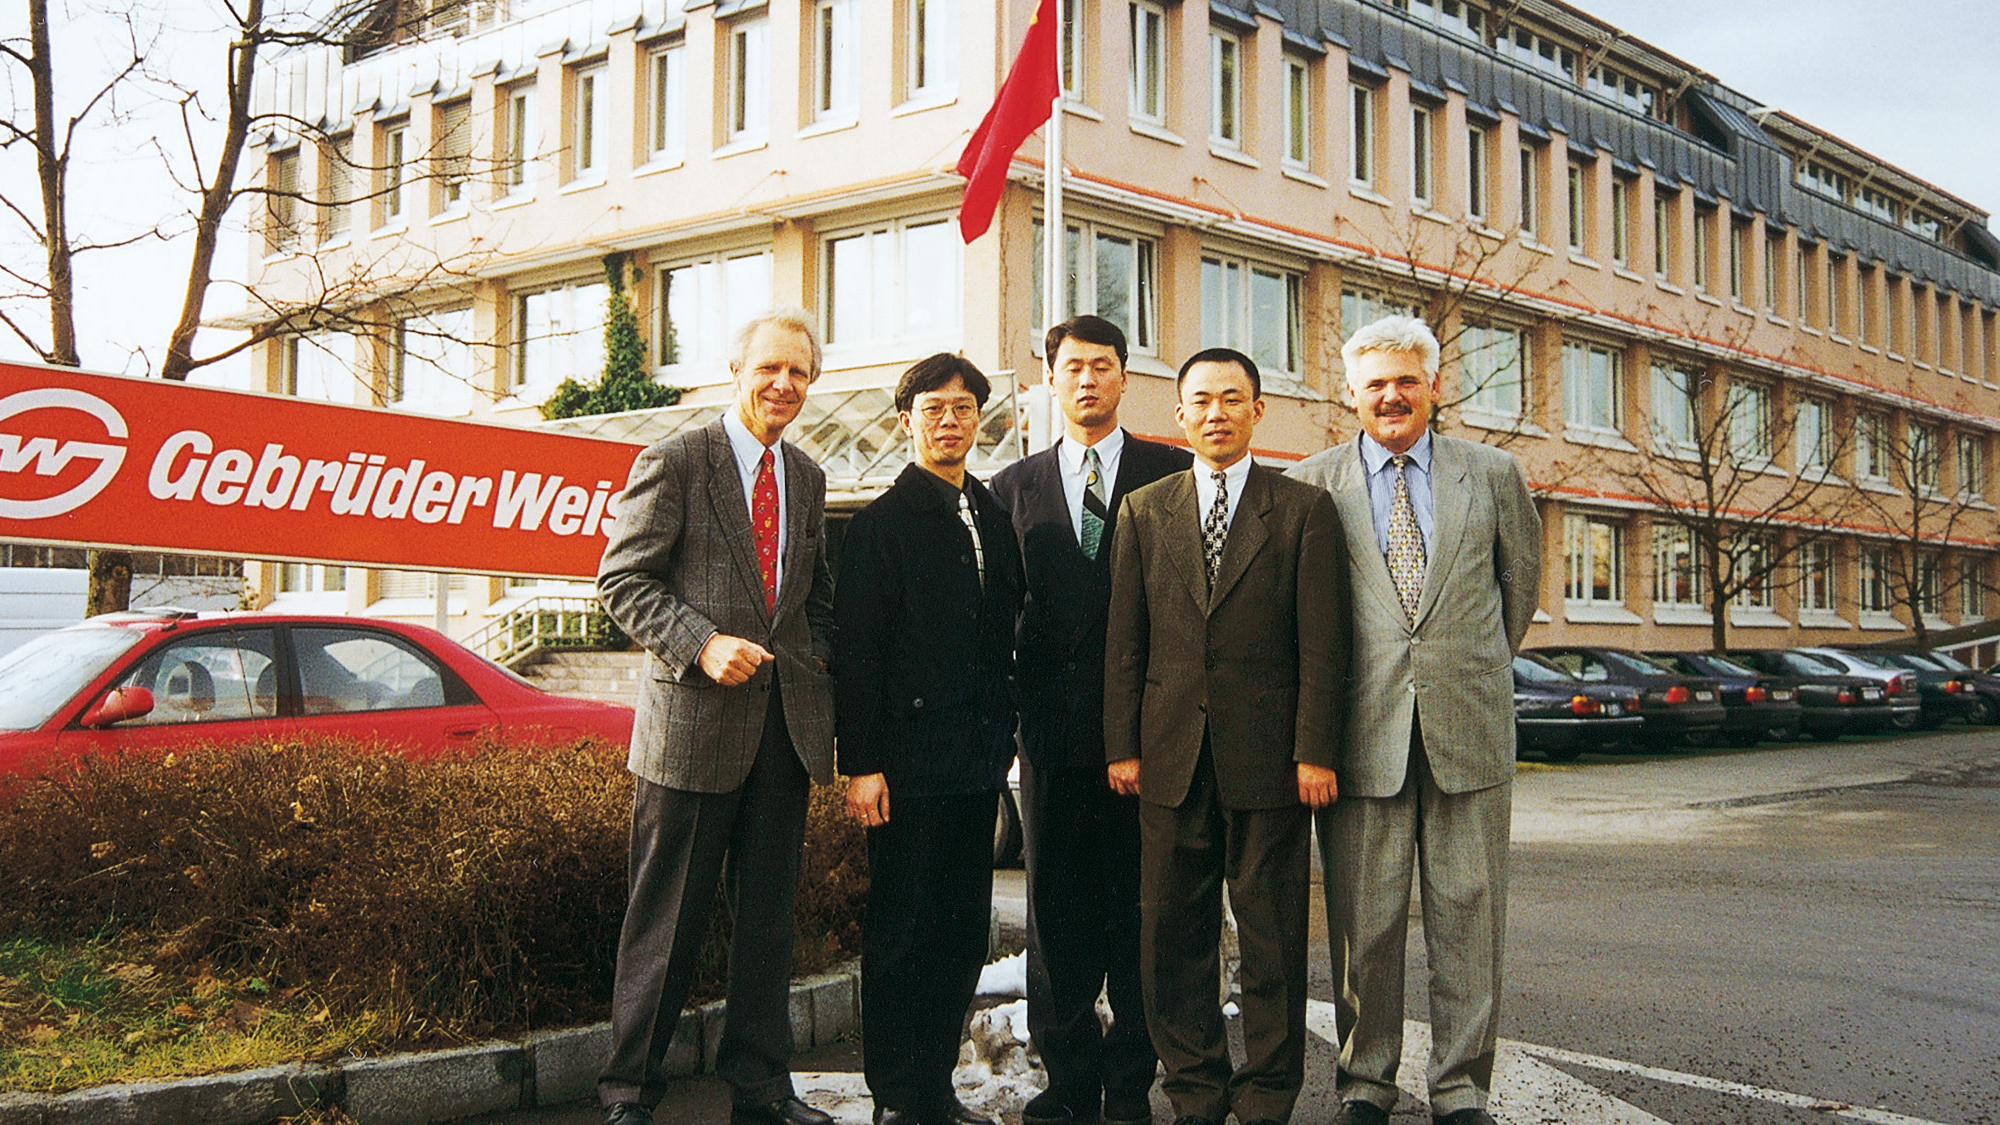 The first visit of China's Gebrüder Weiss management team at the company headquarters in Austria in 1997. /GebrüderWeiss/CGTN